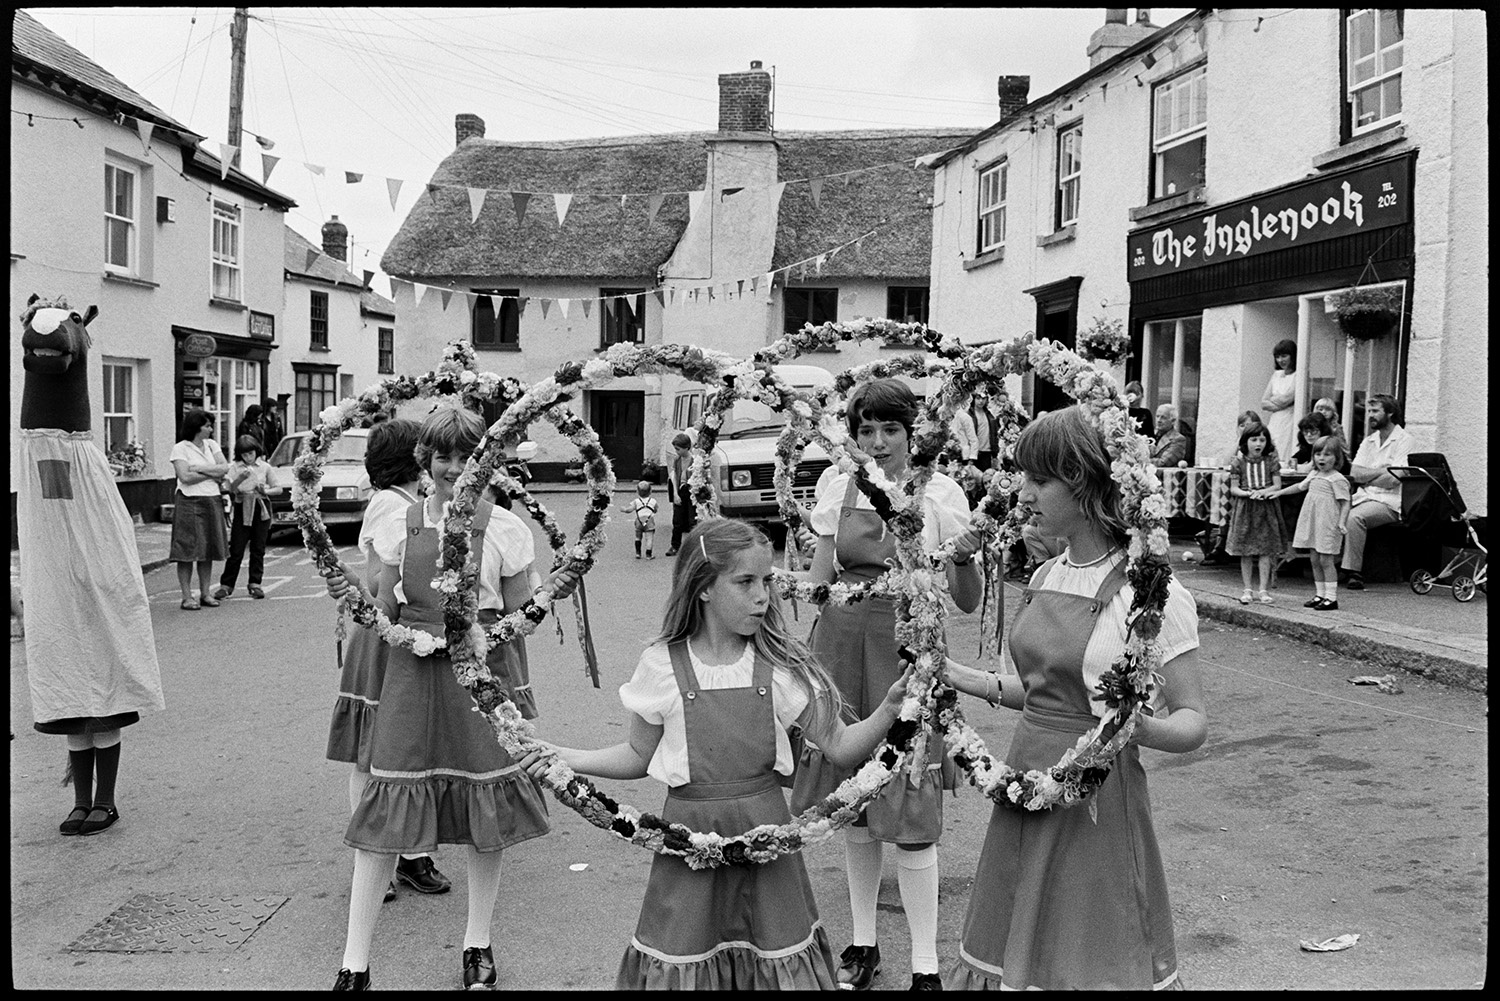 People waiting for fair, cat, pavement artists, Morris Dance.
[A group of girl Morris Dancers or Clog Dancers performing with floral hoops during Winkleigh Fair. A person wearing a horse's head costume is with them. Spectators are watching them from the roadside. A thatched cottage, post office, and the 'The Inglenook' are visible in the background.]